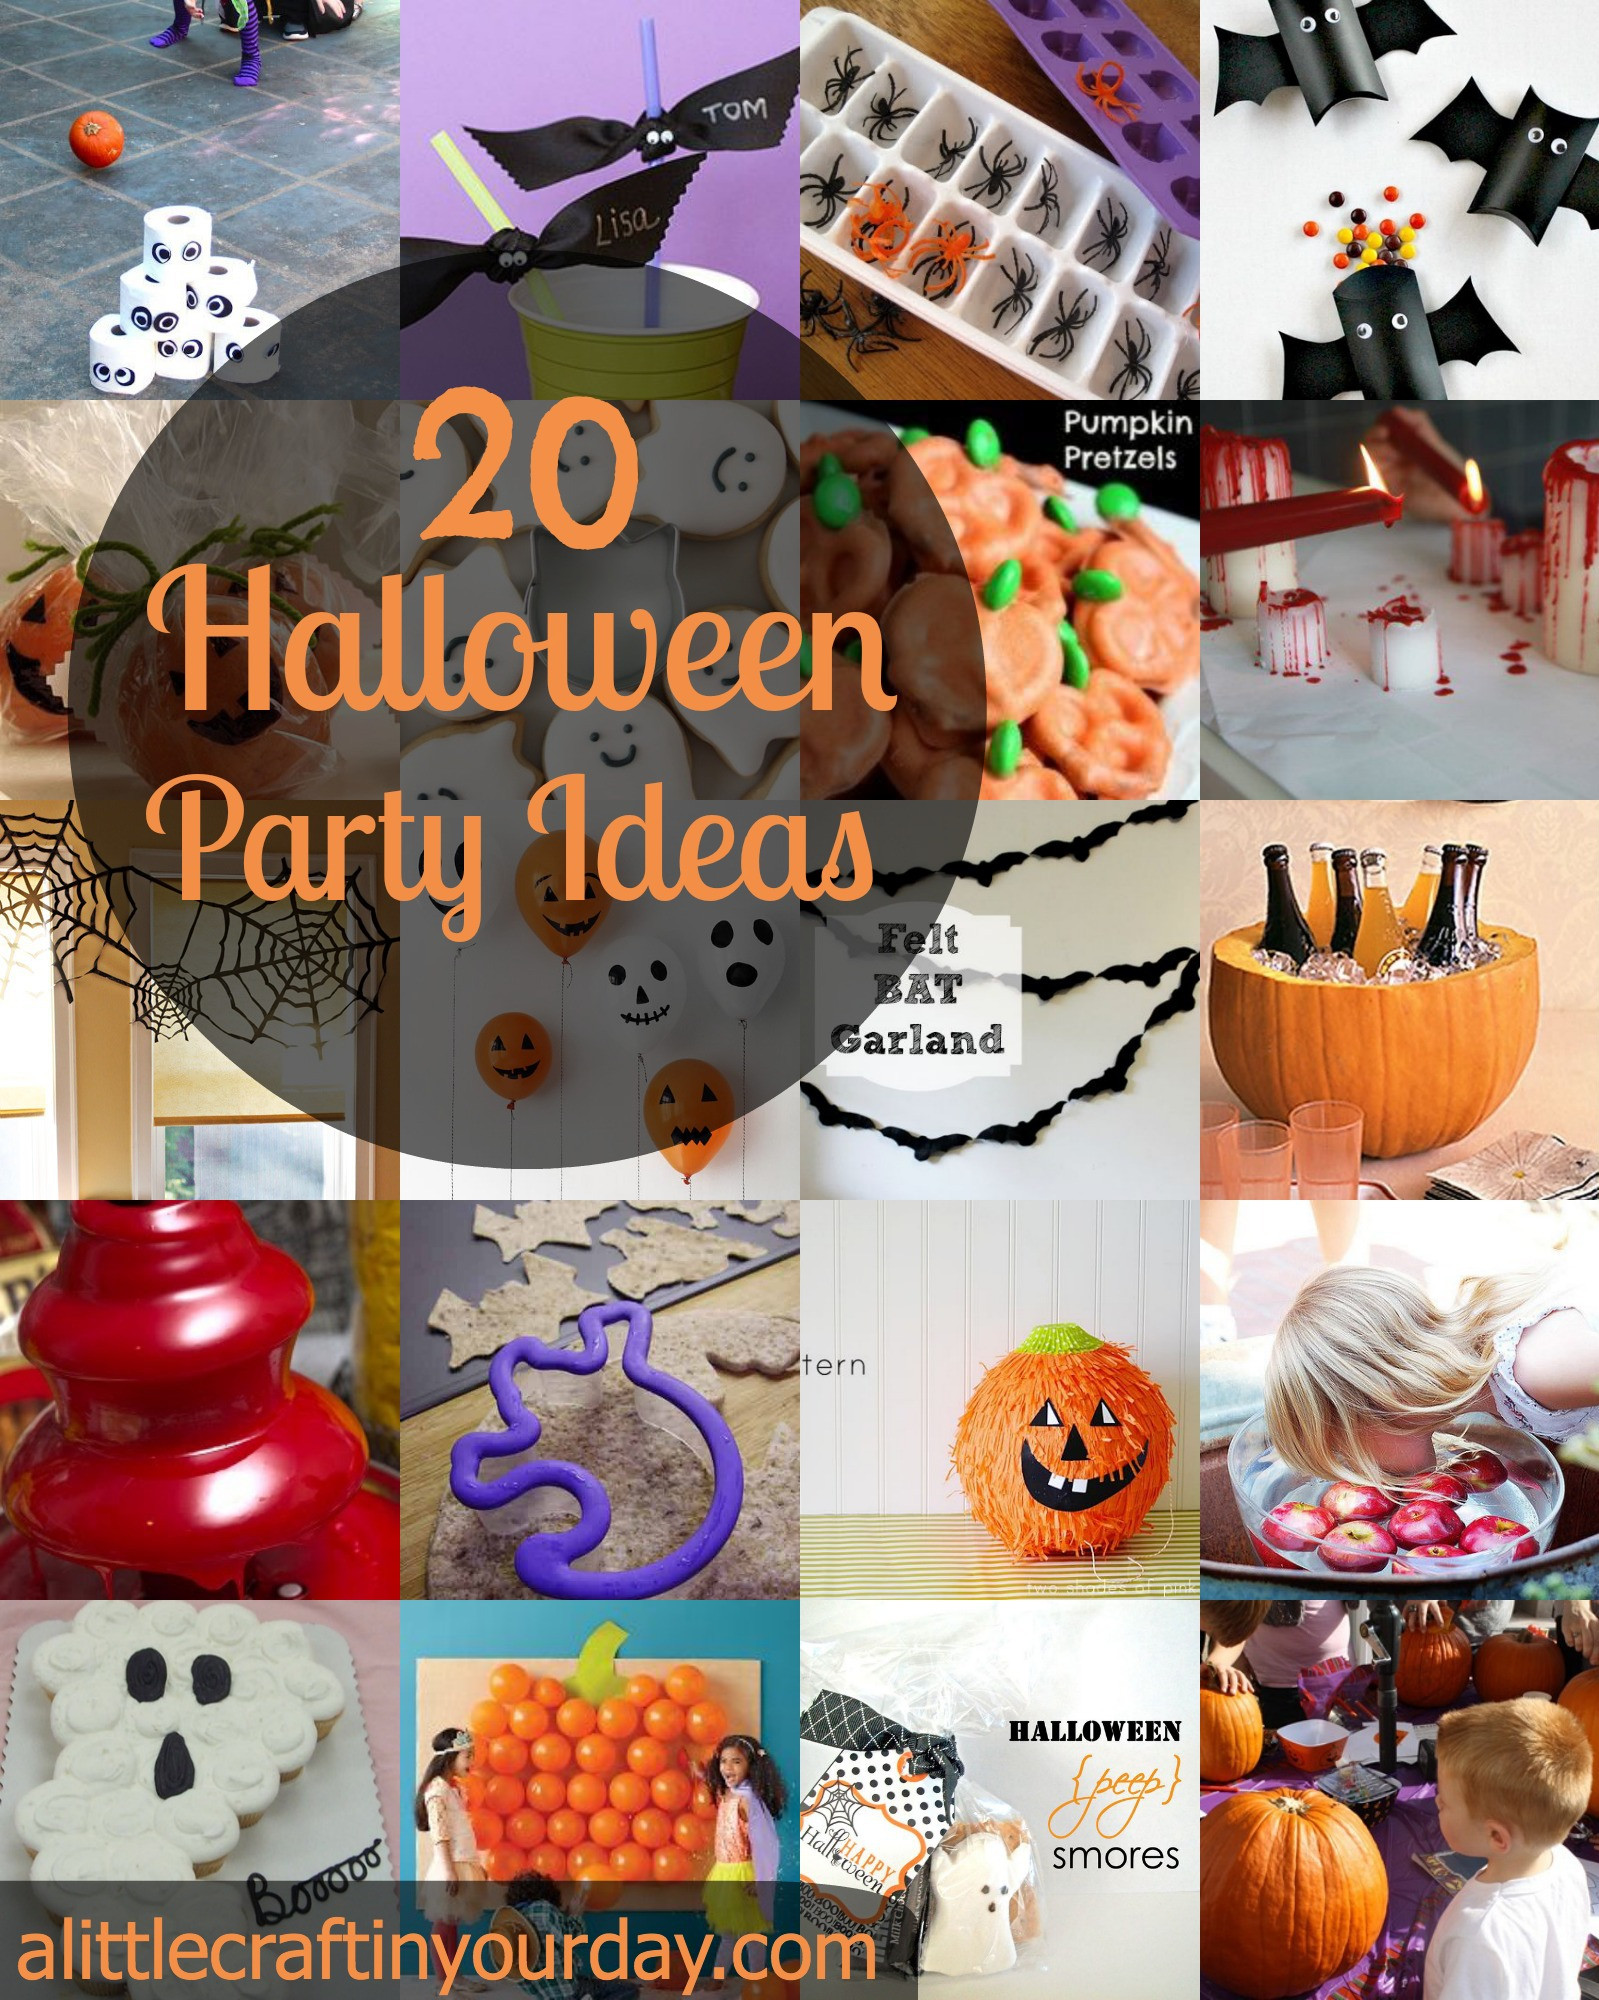 Ideas For Halloween Party
 21 Halloween Party Ideas A Little Craft In Your Day